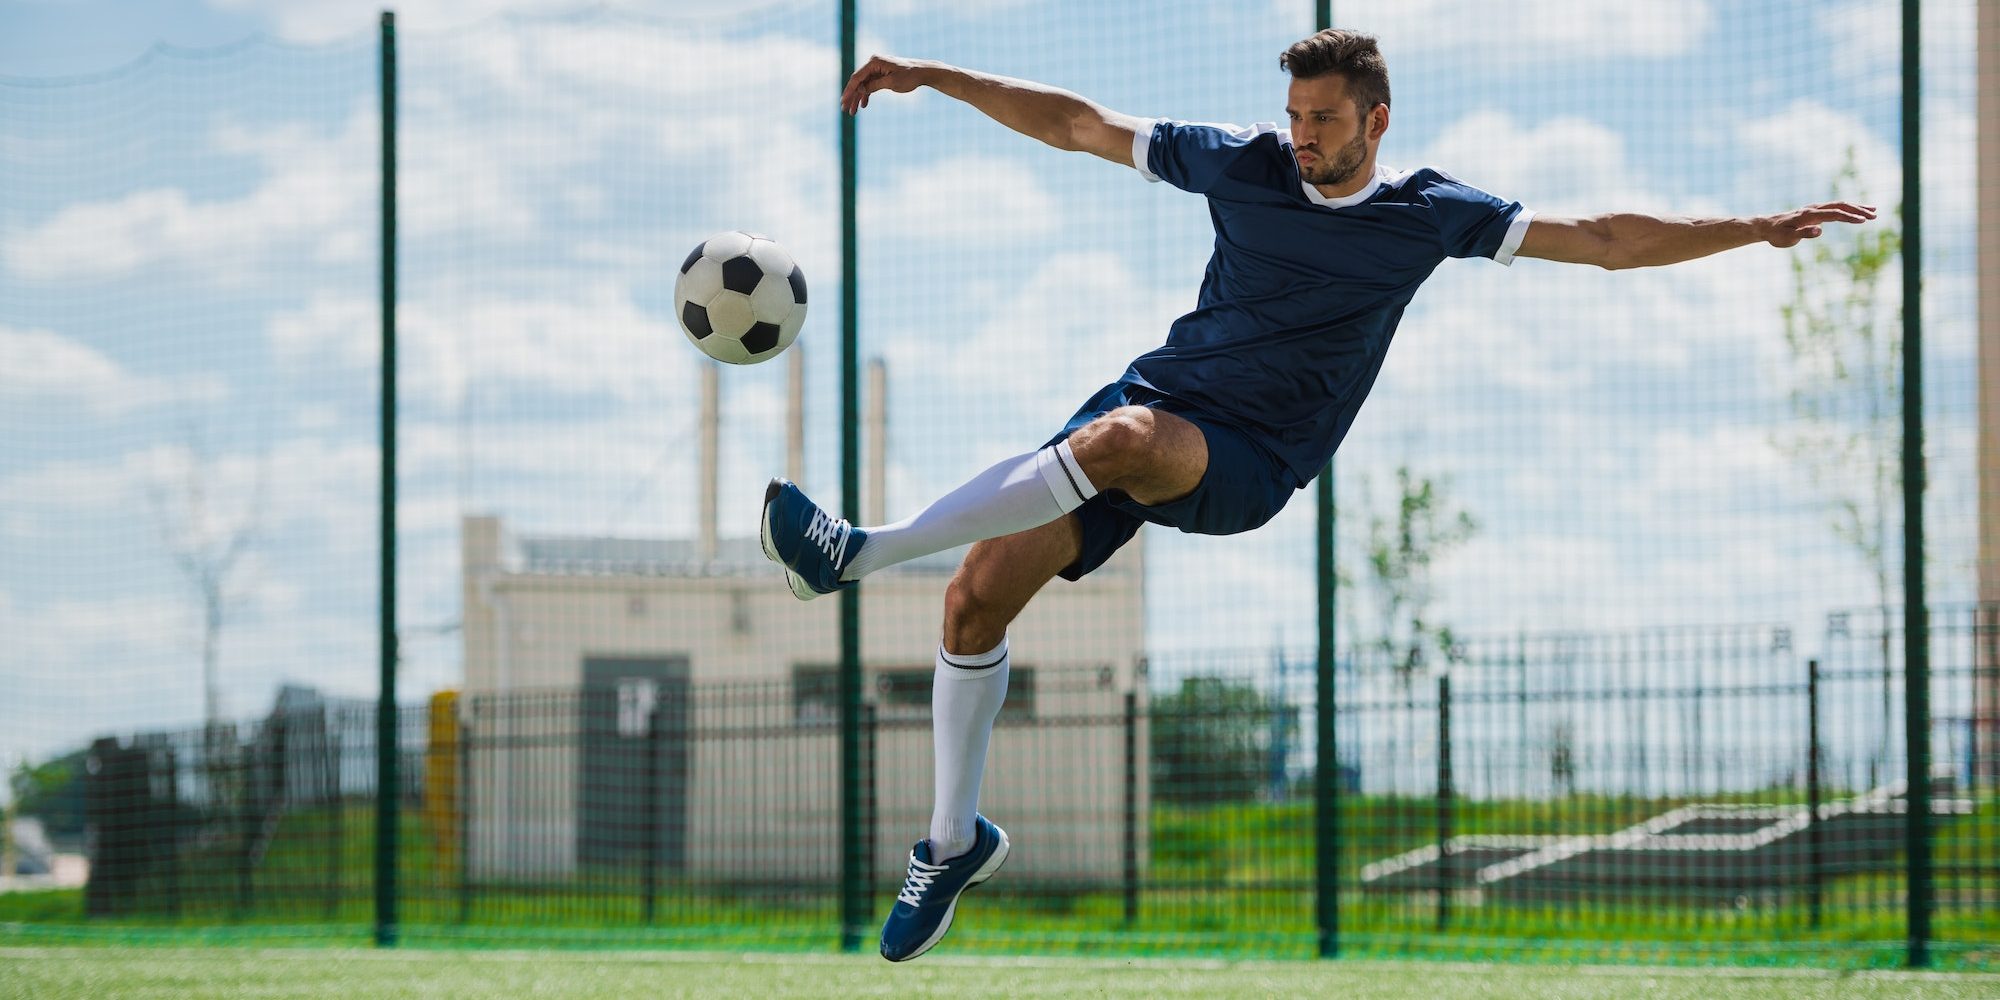 athletic soccer player kicking ball on soccer pitch